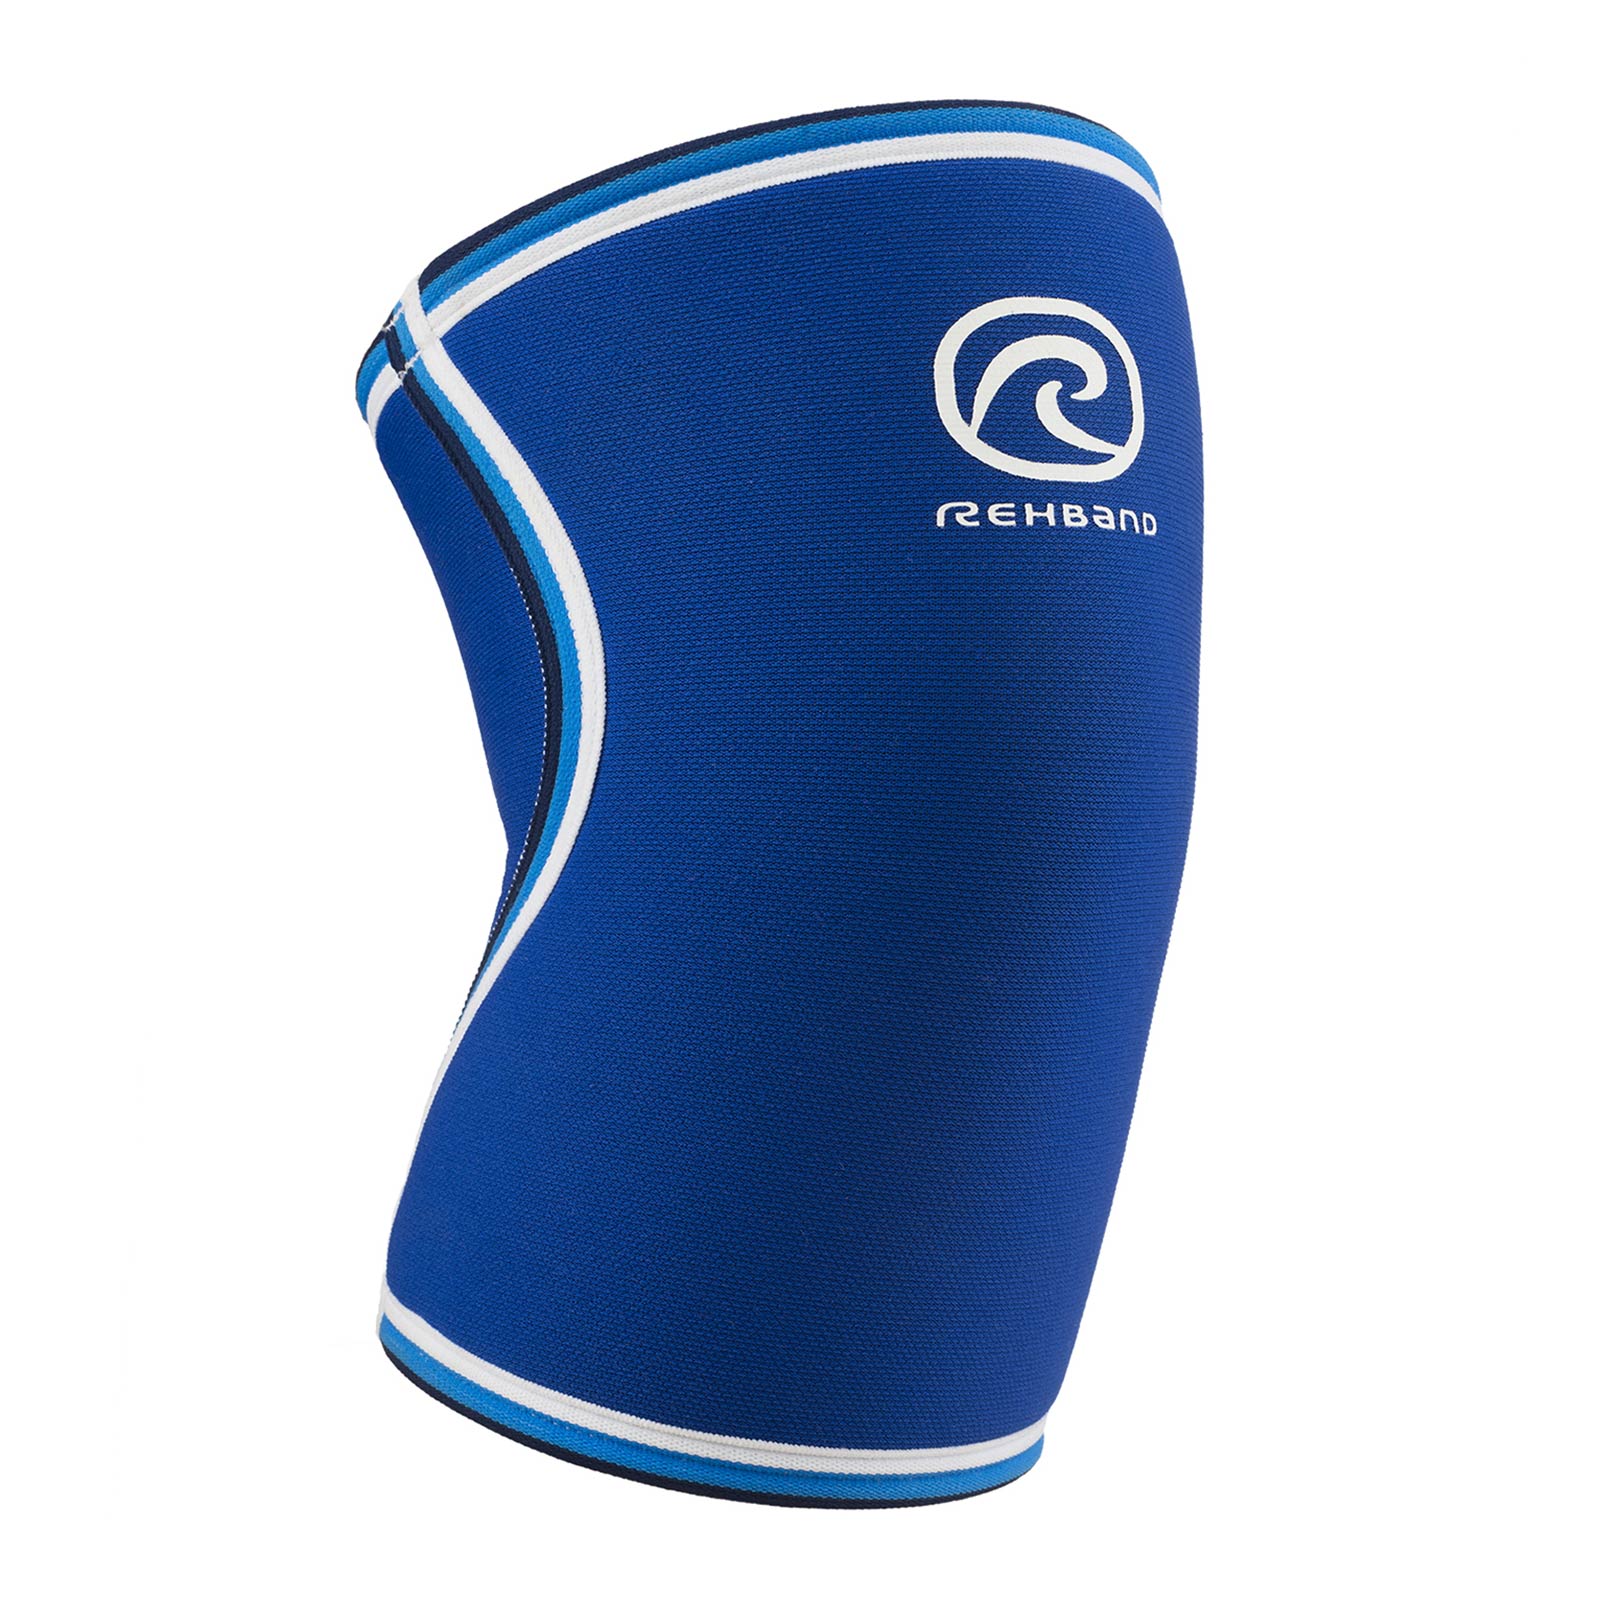 A blue knee sleeve with a white Rehband lettering and logo at the top